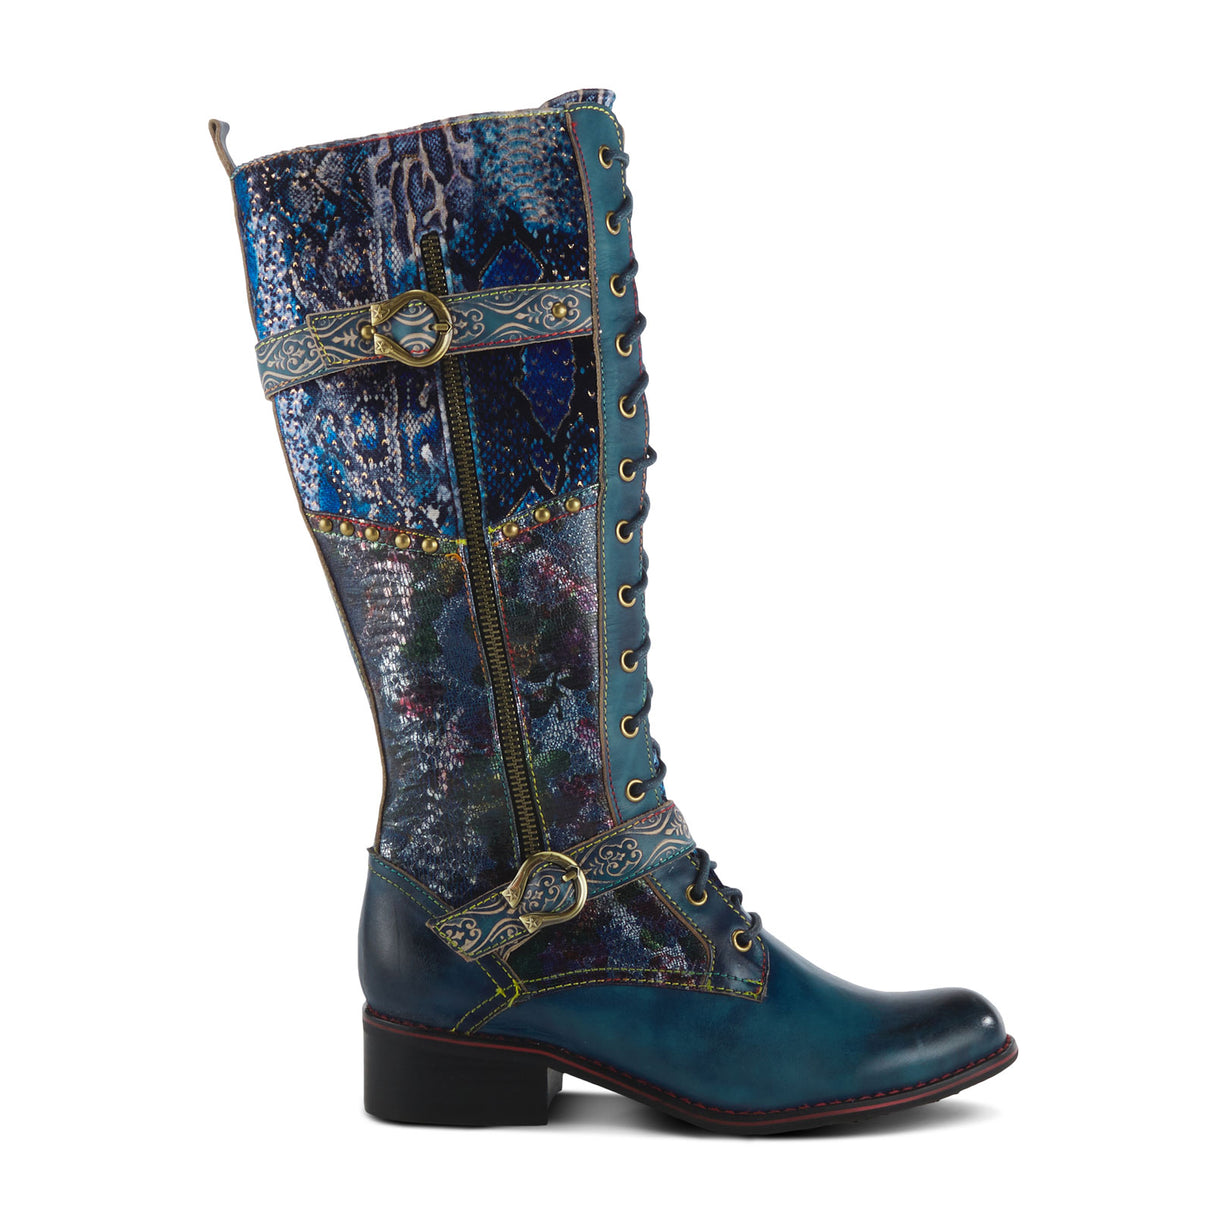 L'Artiste Vaneyck Tall Boot (Women) - Blue Multi Boots - Fashion - High - The Heel Shoe Fitters